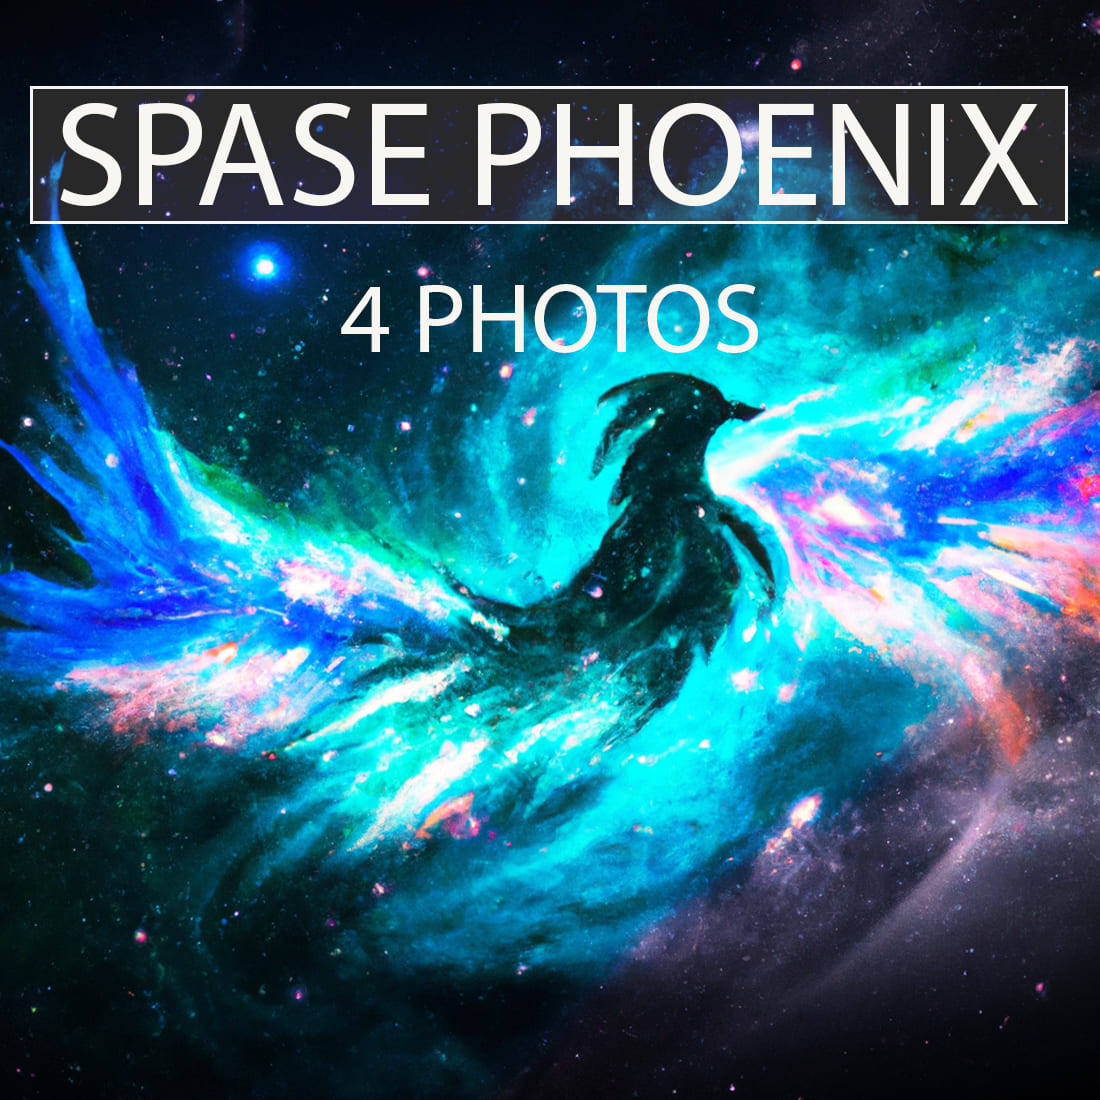 Phoenix in Space main cover image.